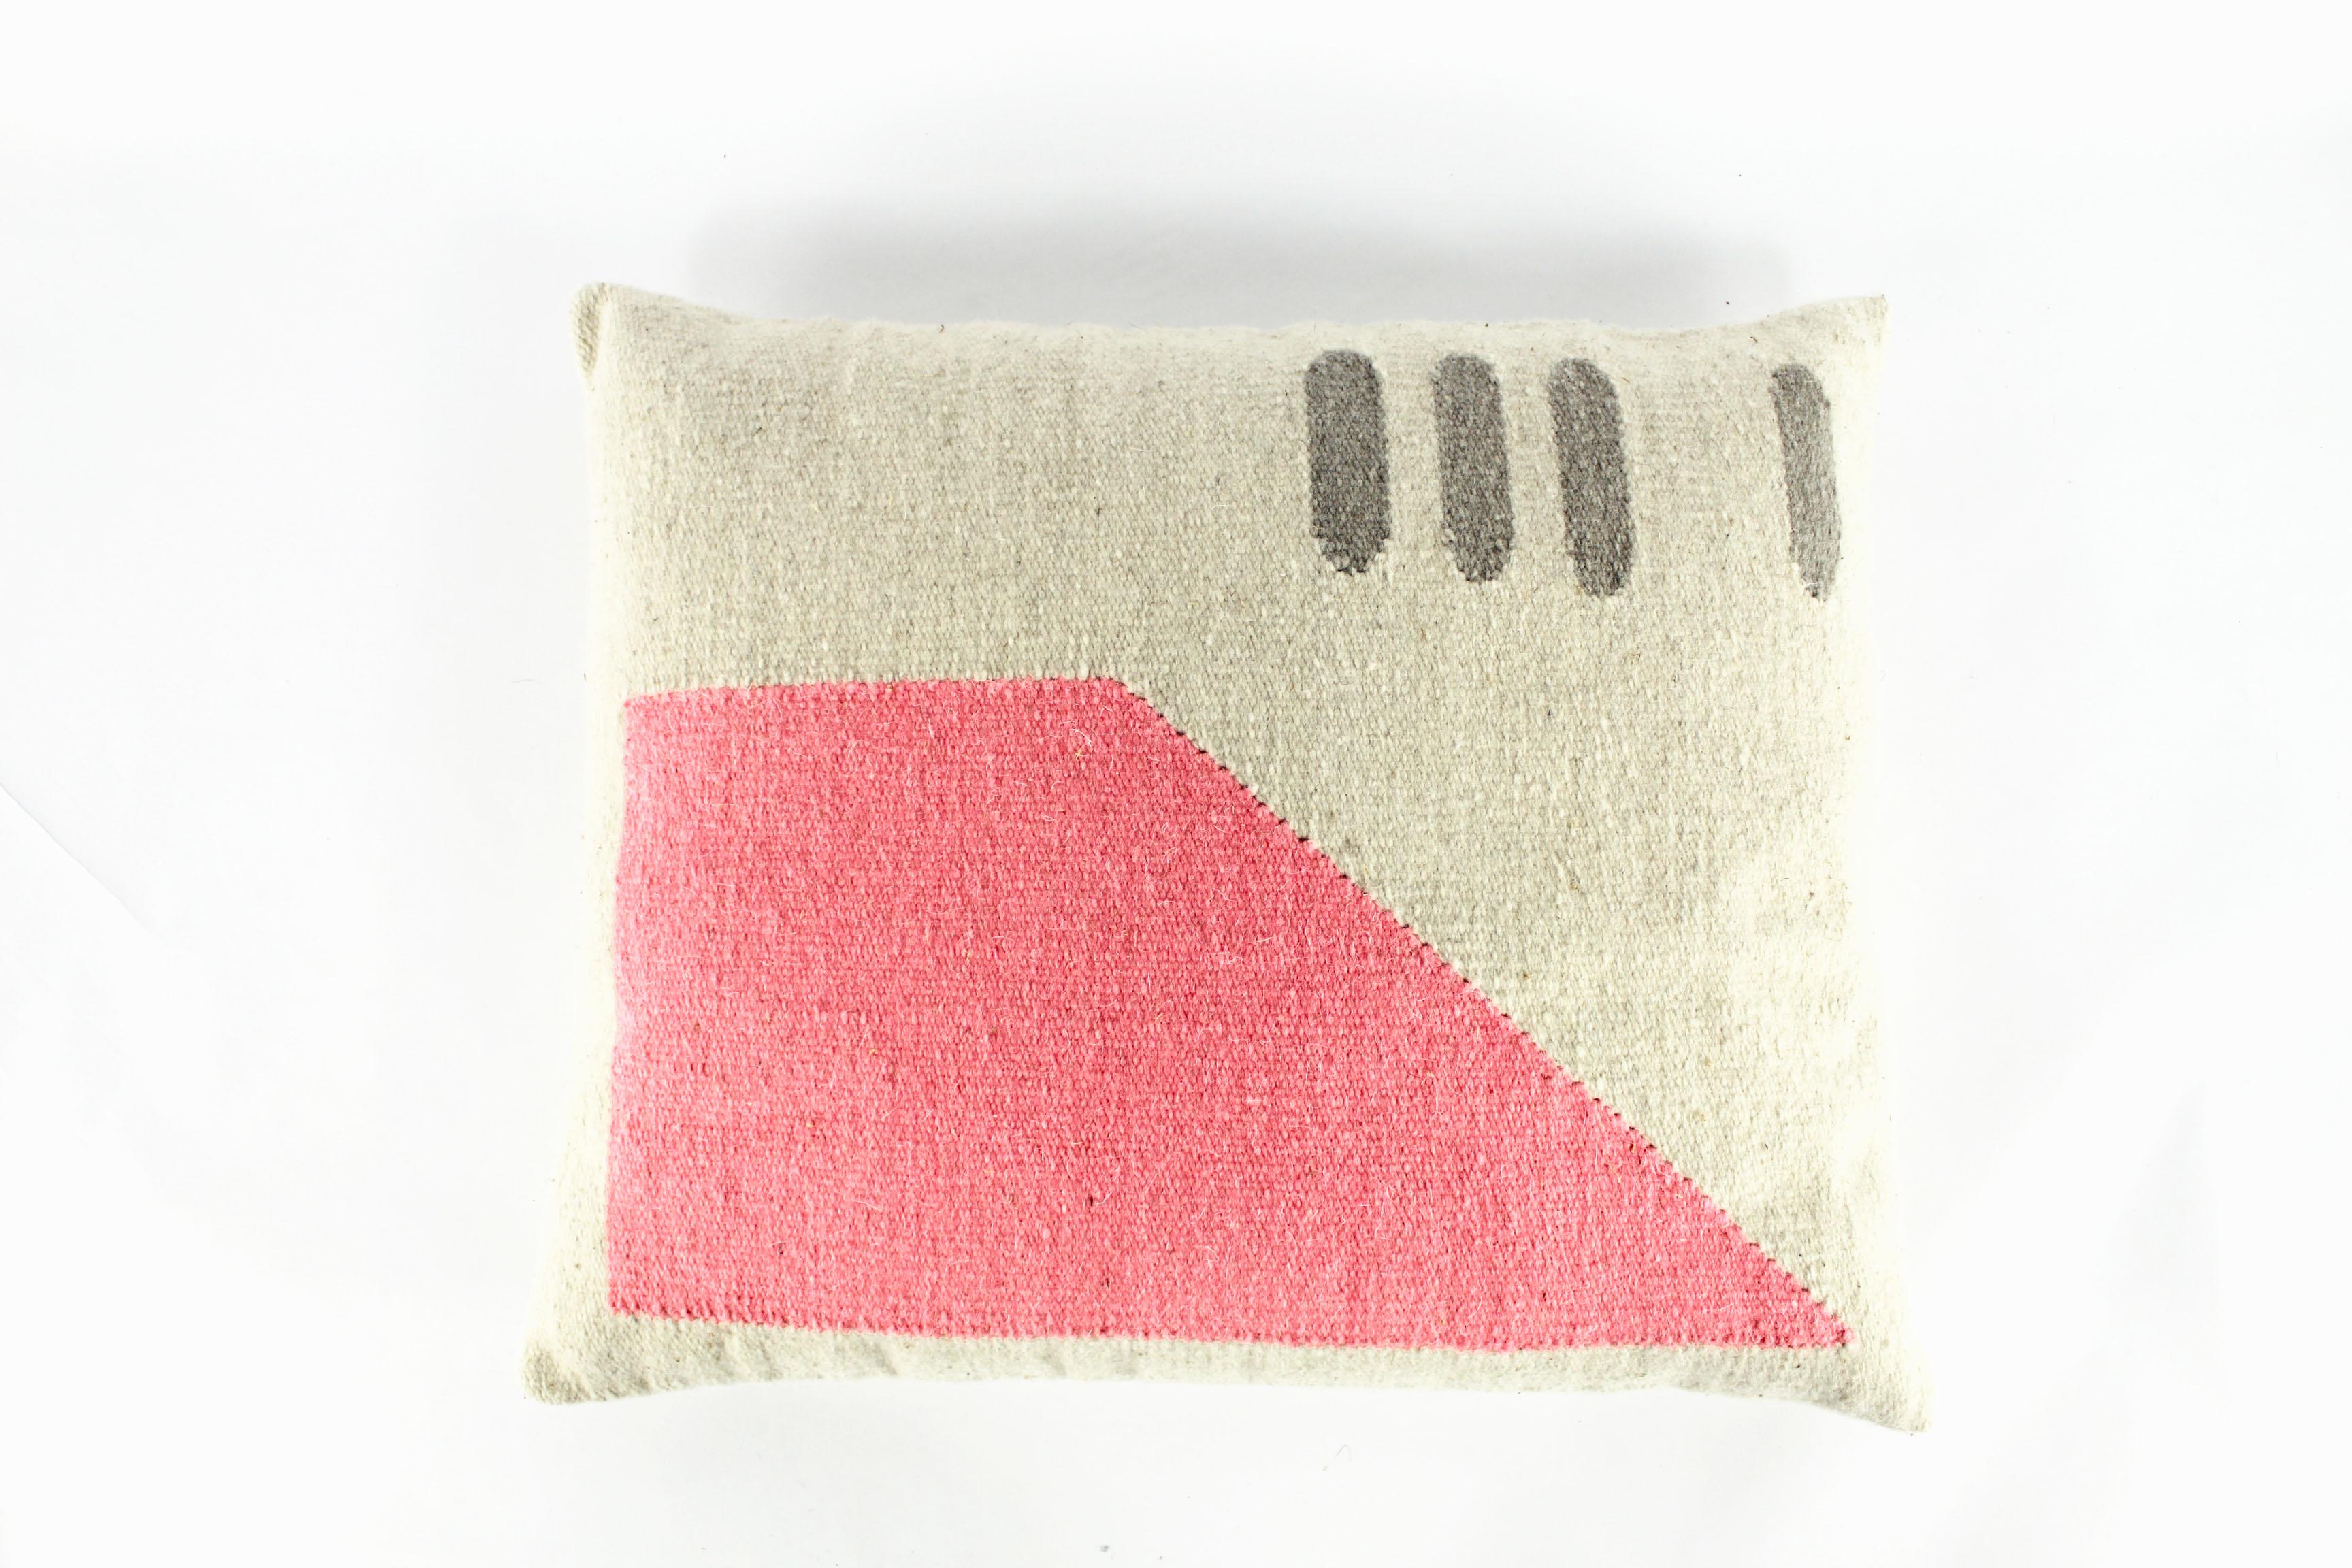 This set of bespoke pillows is handmade from 100% natural materials in the maker's studio in Brooklyn, NY.

The wool is sourced from a village south Oaxaca, a blend of merino and churro wool, and spun with variations that give it incredible texture